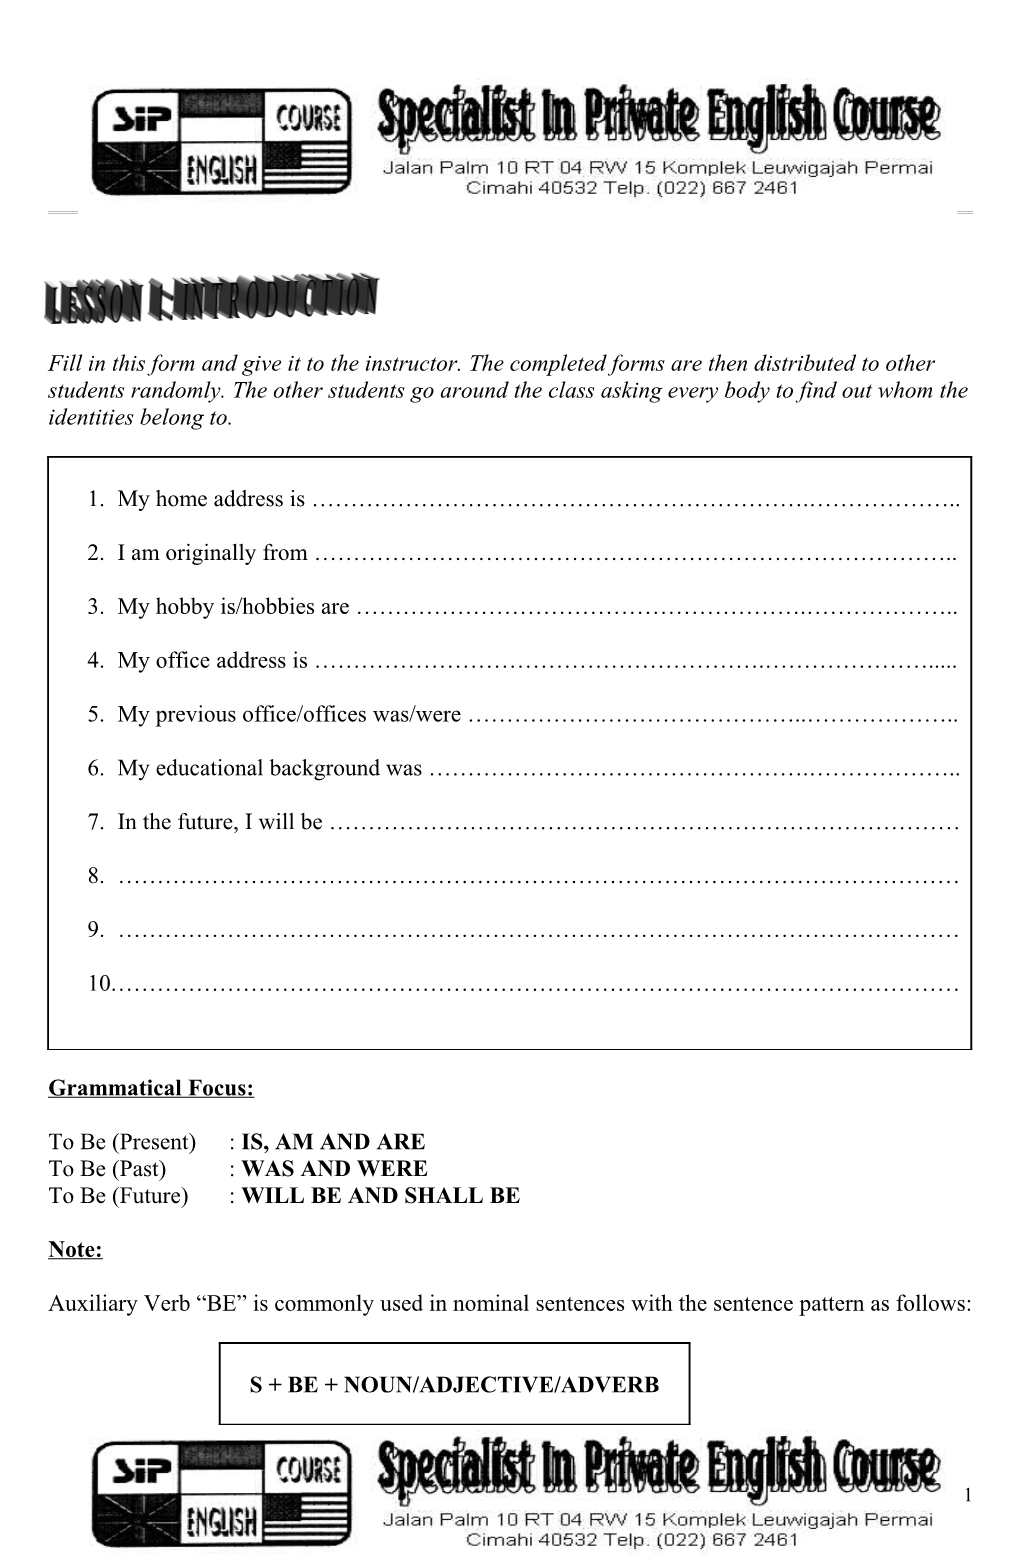 Fill in This Form and Give It to the Instructor. the Completed Forms Are Then Distributed